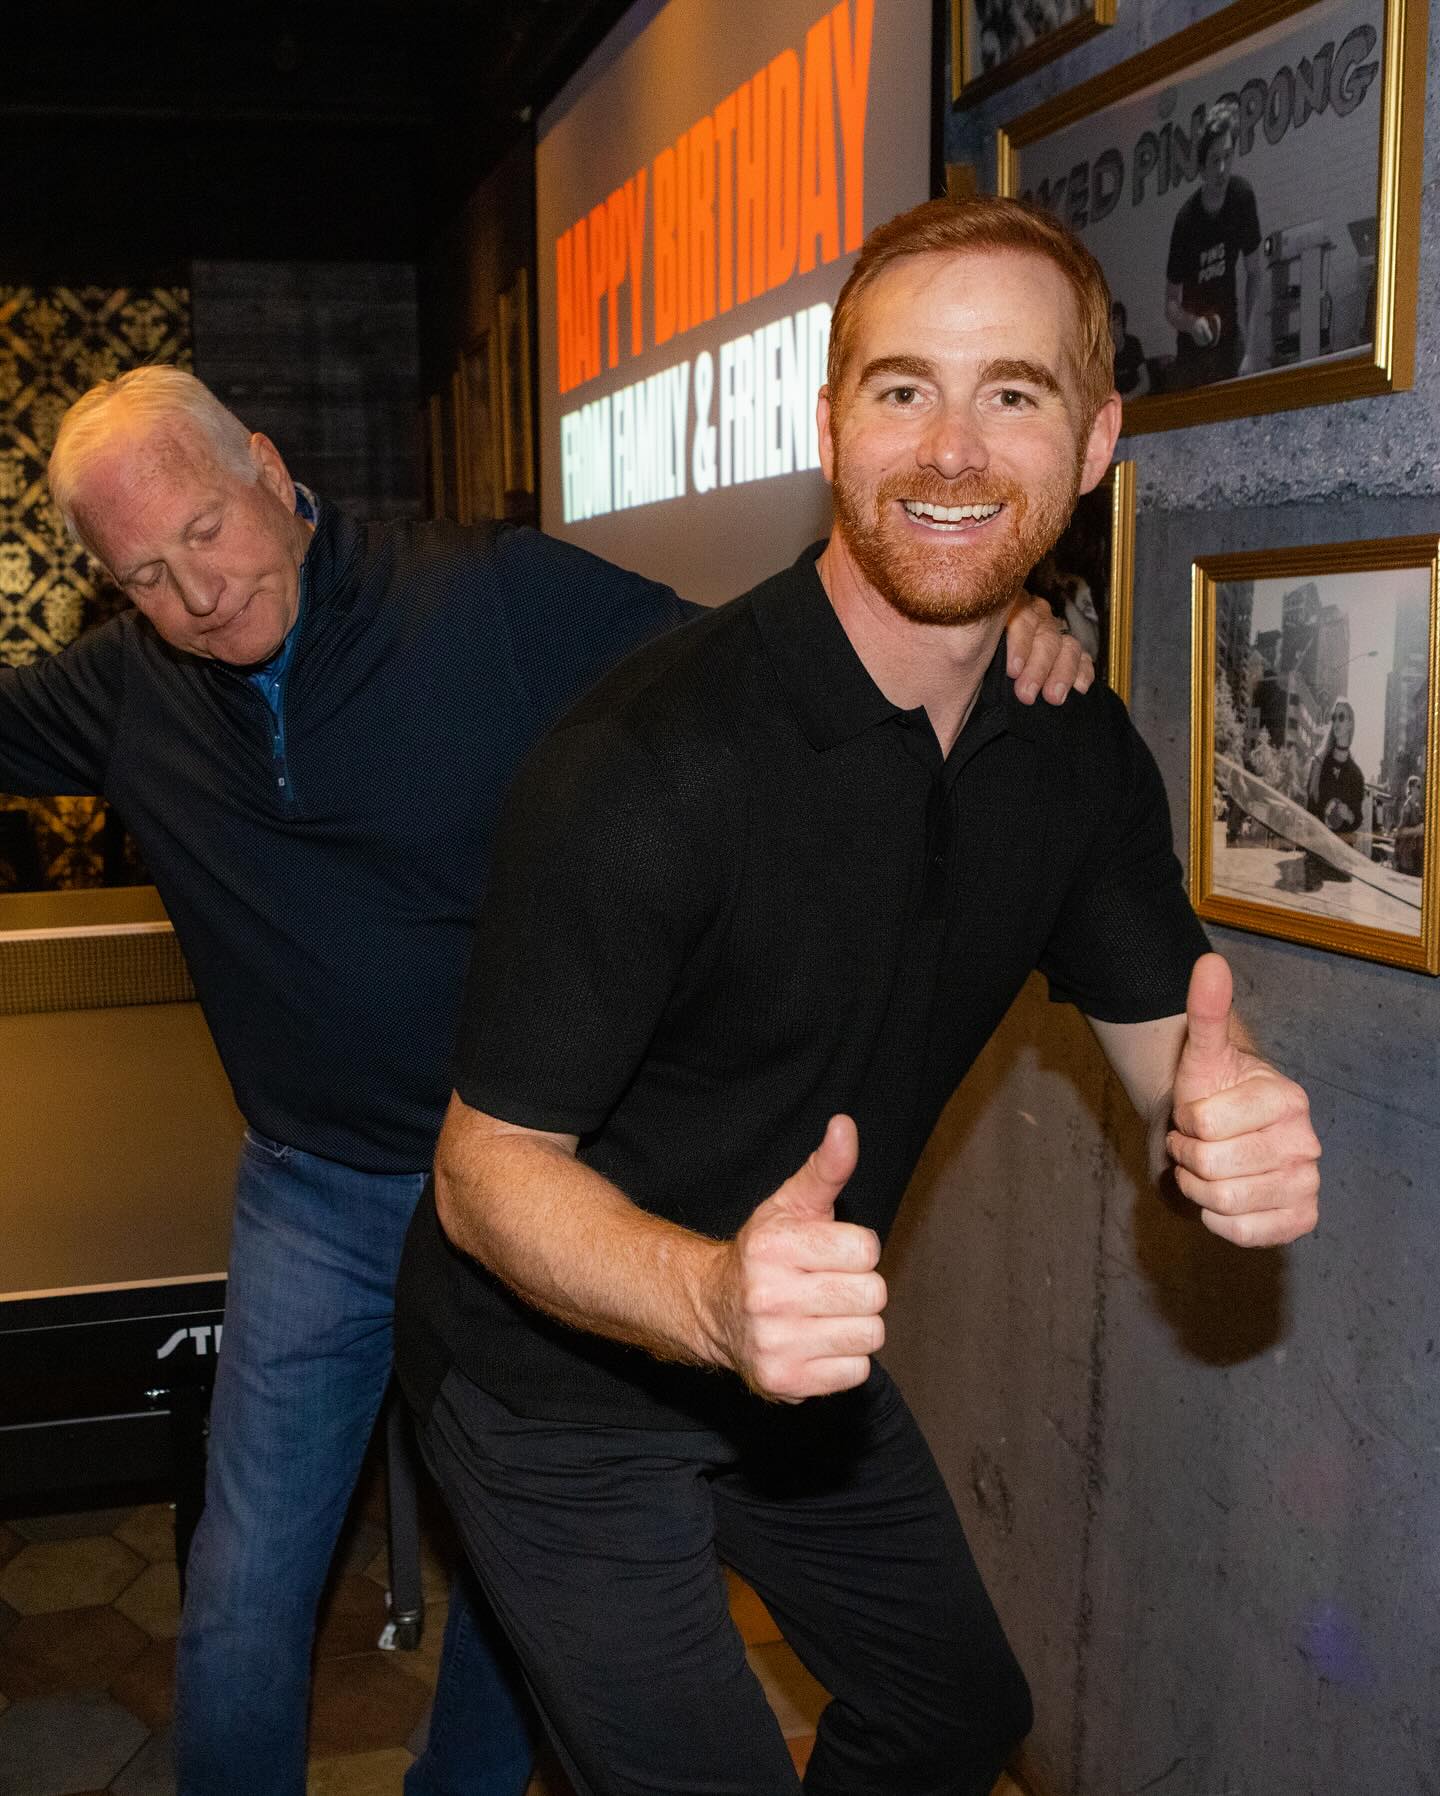 Andrew Santino gave a thumbs up as he was spanked by his friend, and as seen in the picture he lacks a wedding band in his ring finger.